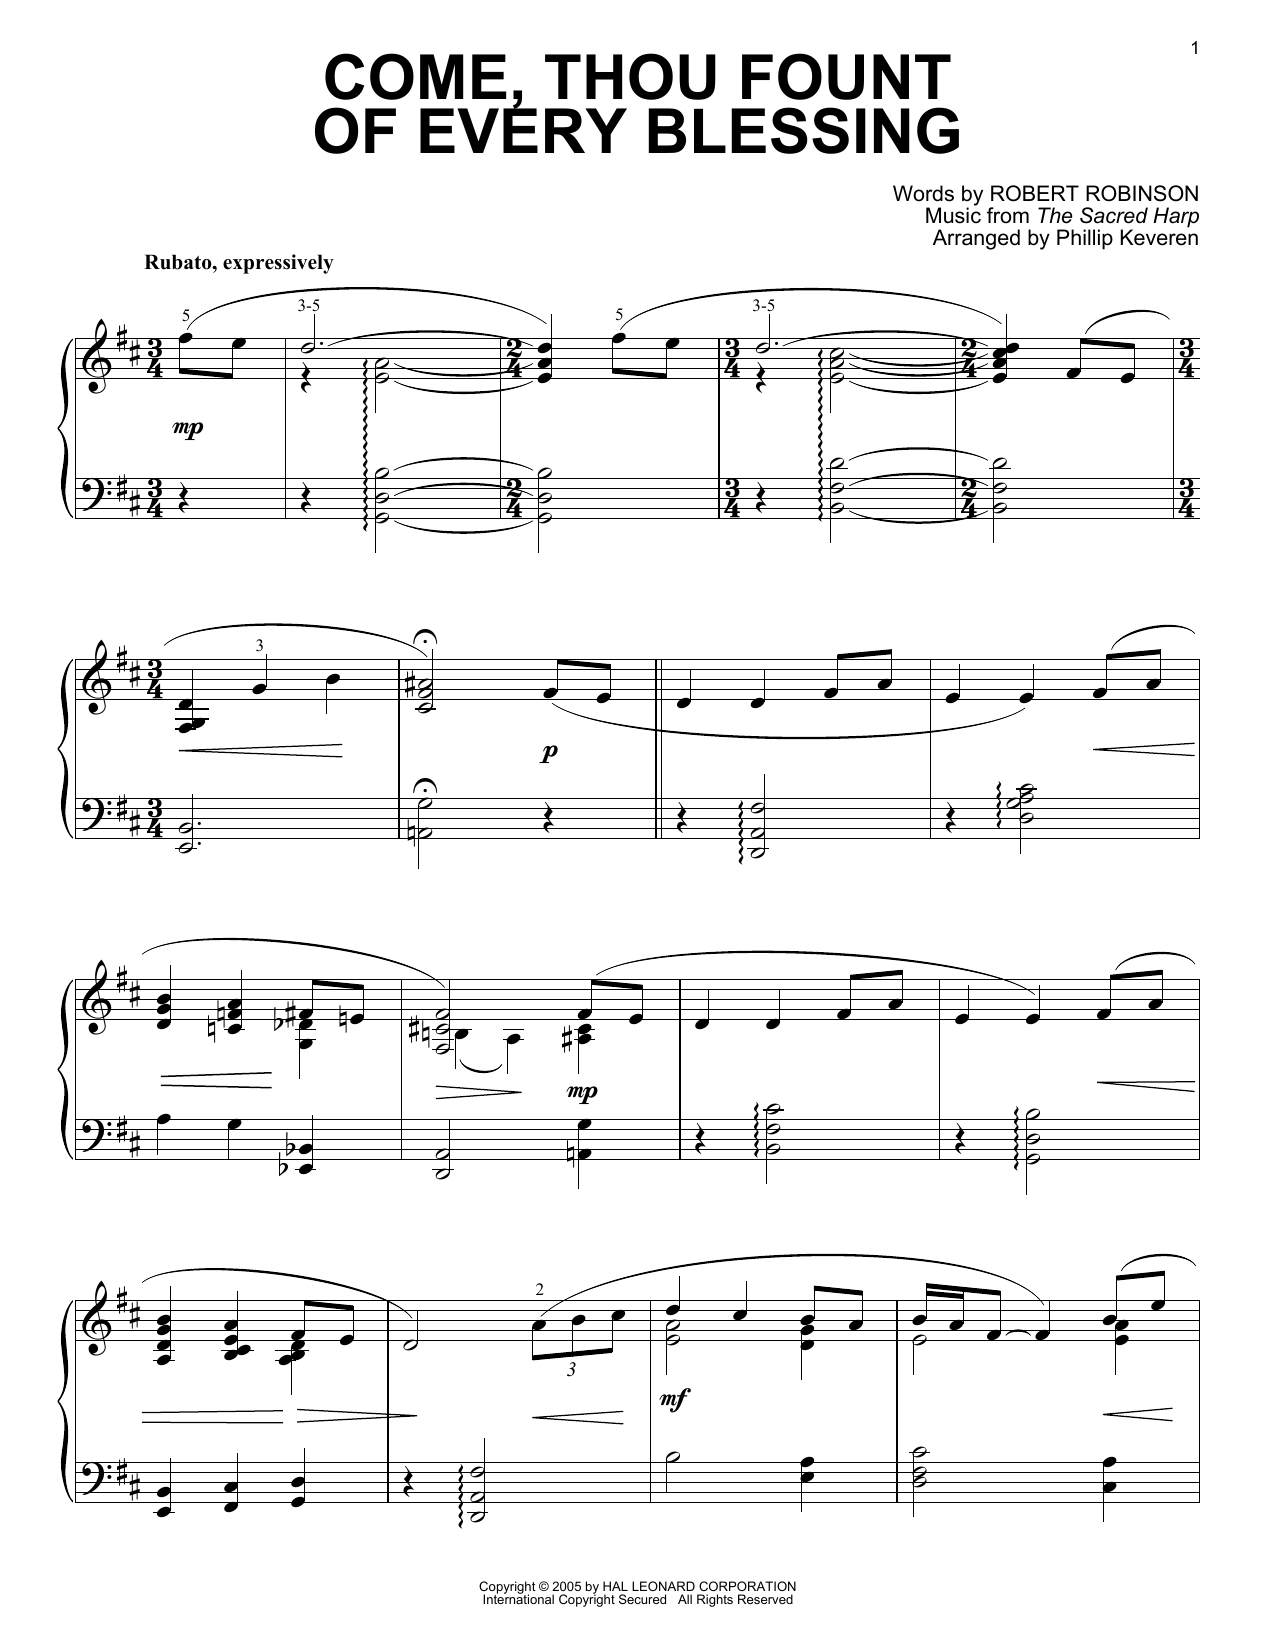 Download Robert Robinson Come, Thou Fount of Every Blessing [Jaz Sheet Music